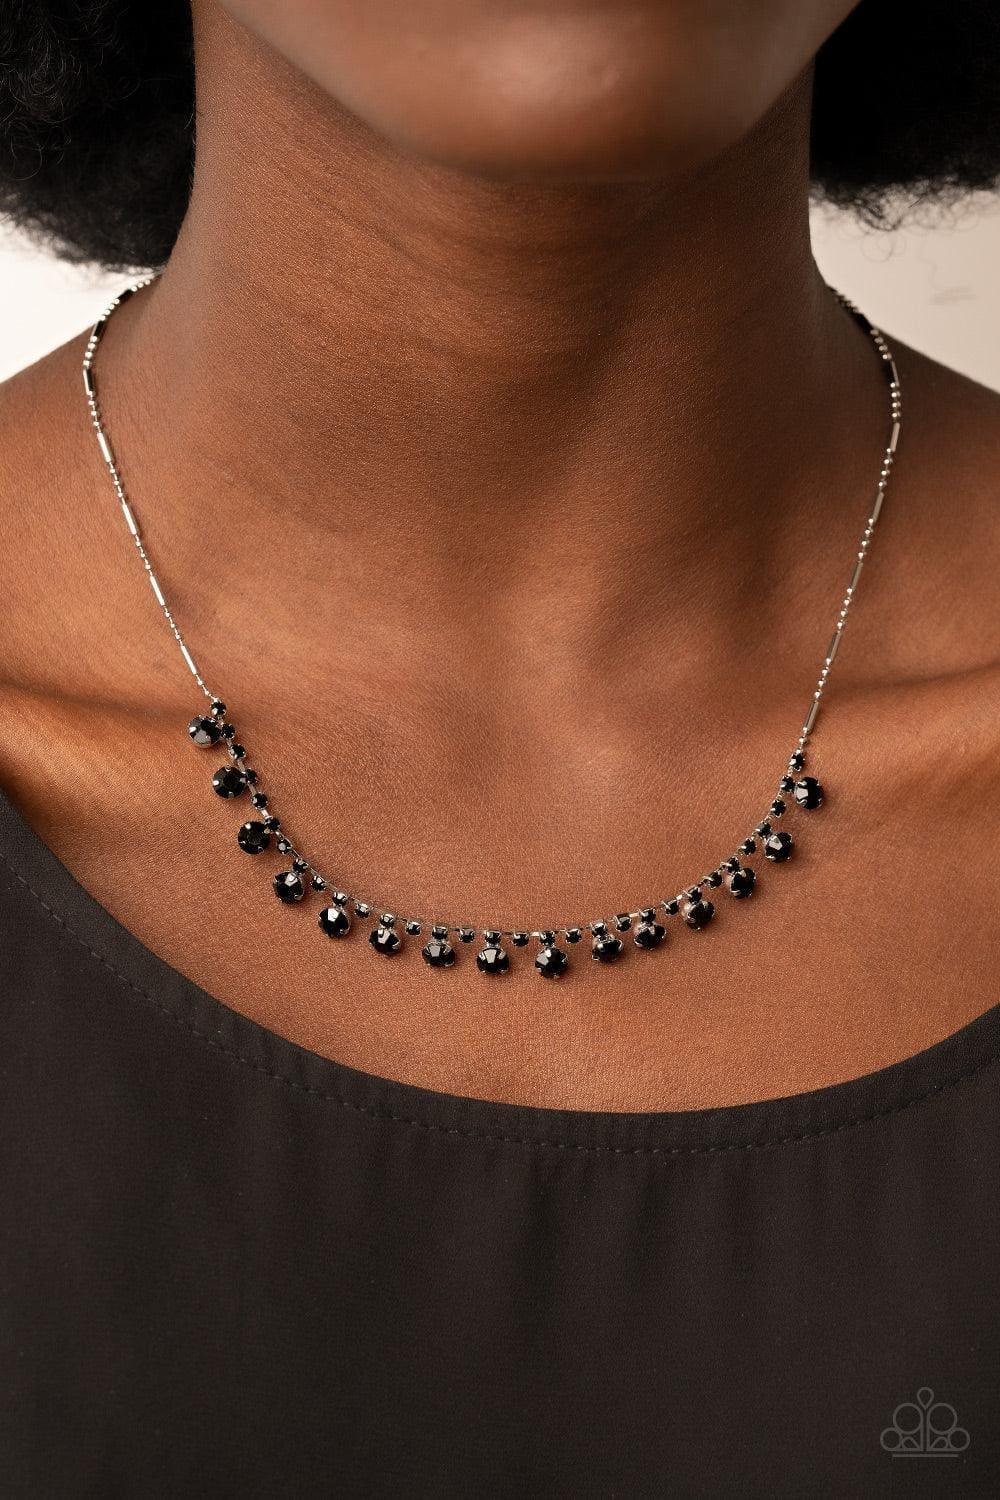 Paparazzi Accessories - Cue The Mic Drop - Black Necklace - Bling by JessieK